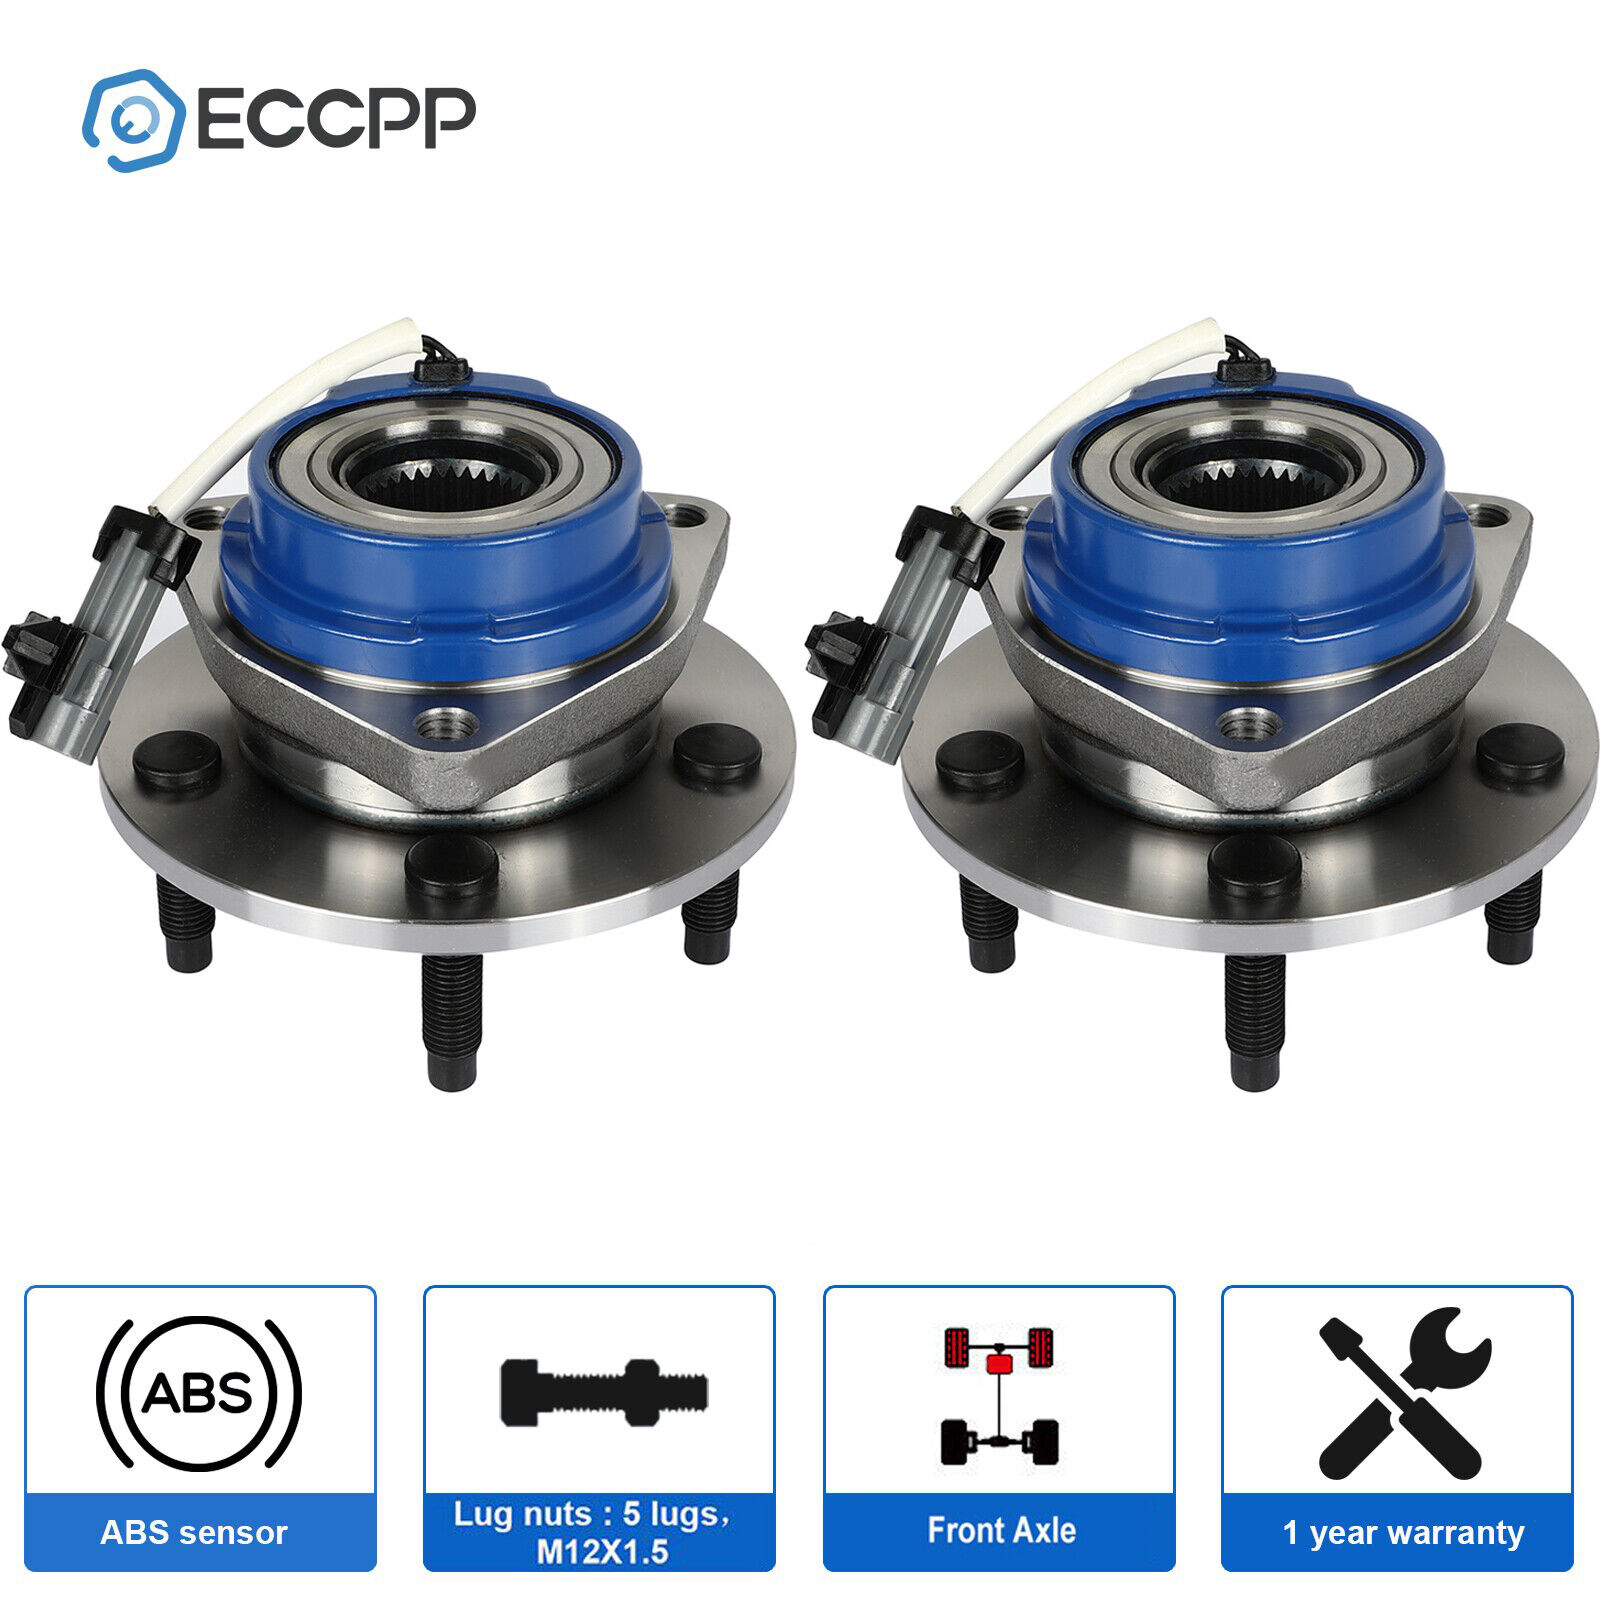 ECCPP 2Pcs Wheel Hub Bearing Front For Chevy Impala Buick Lacrosse Lesabre FWD